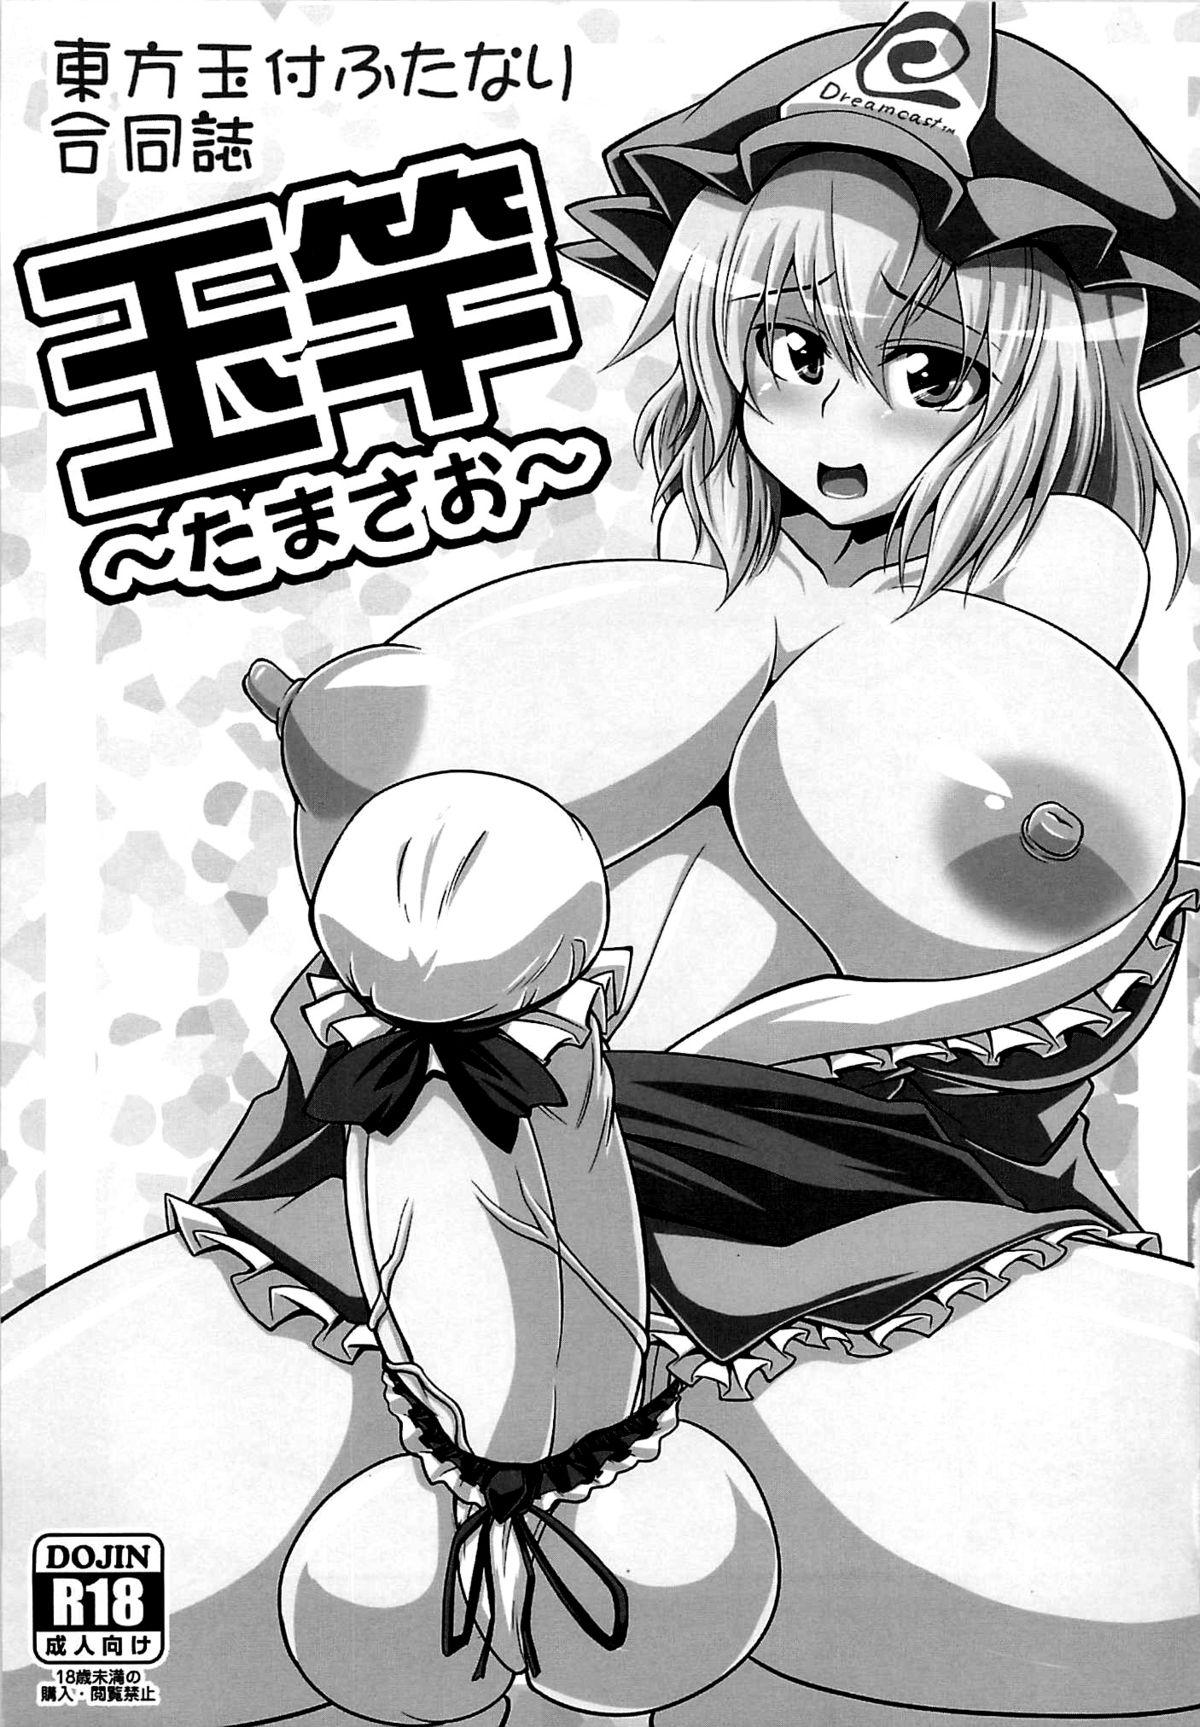 Trimmed Touhou Futanari With Balls Compilation - Touhou project Milf Porn - Page 2